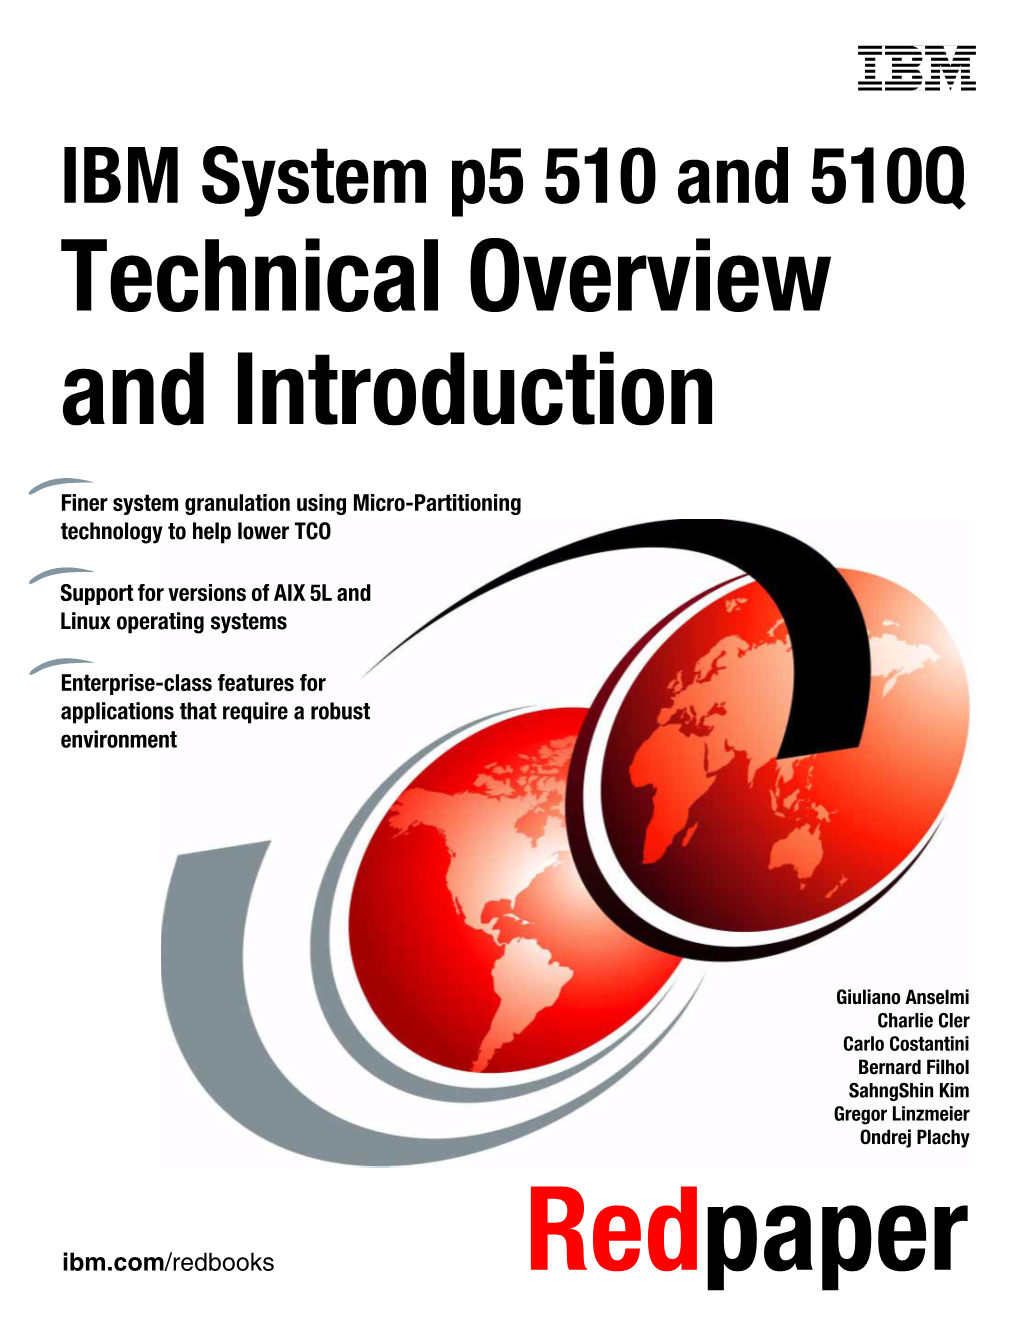 IBM System P5 510 and 510Q Technical Overview and Introduction